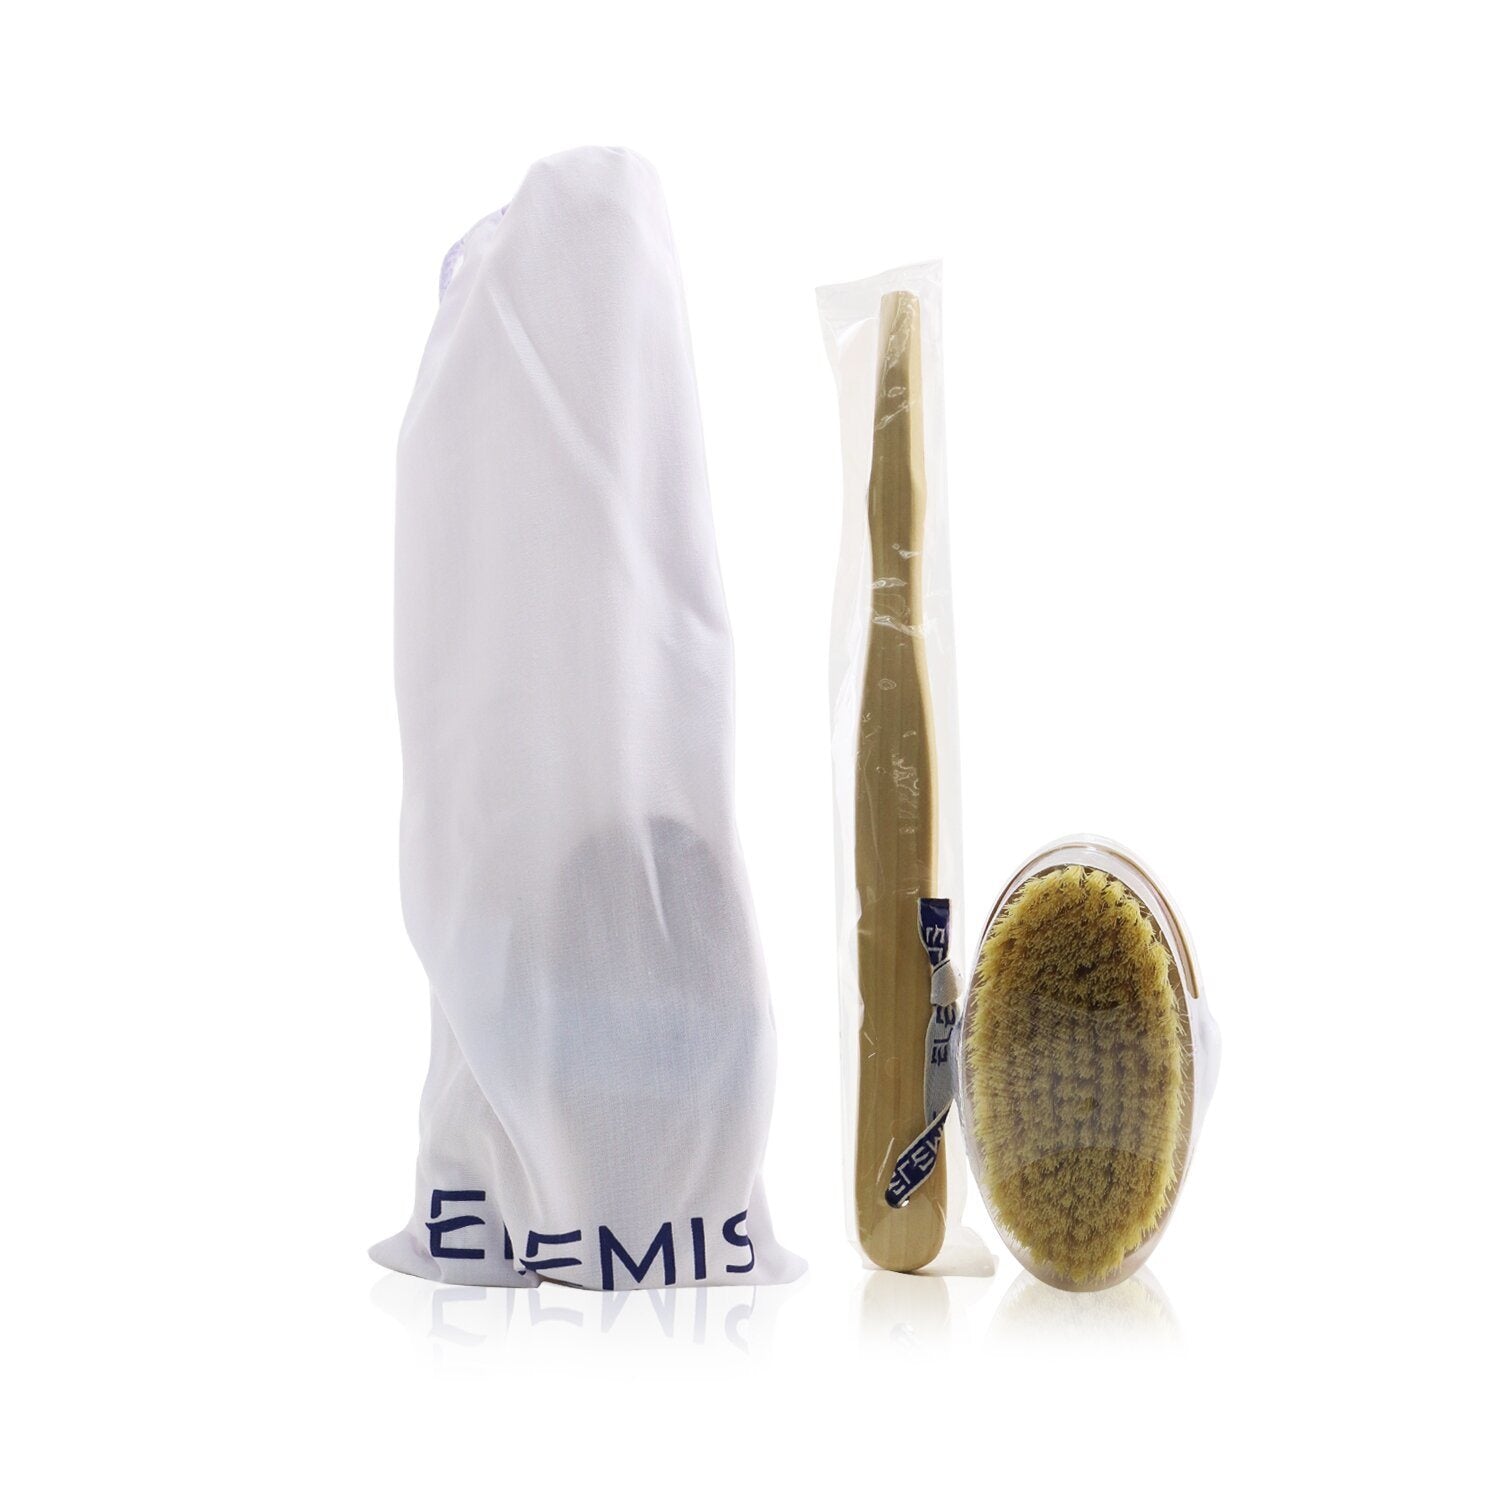 A Body Detox Skin Brush with a plastic bag next to it, ideal for improving skin texture and reducing cellulite.